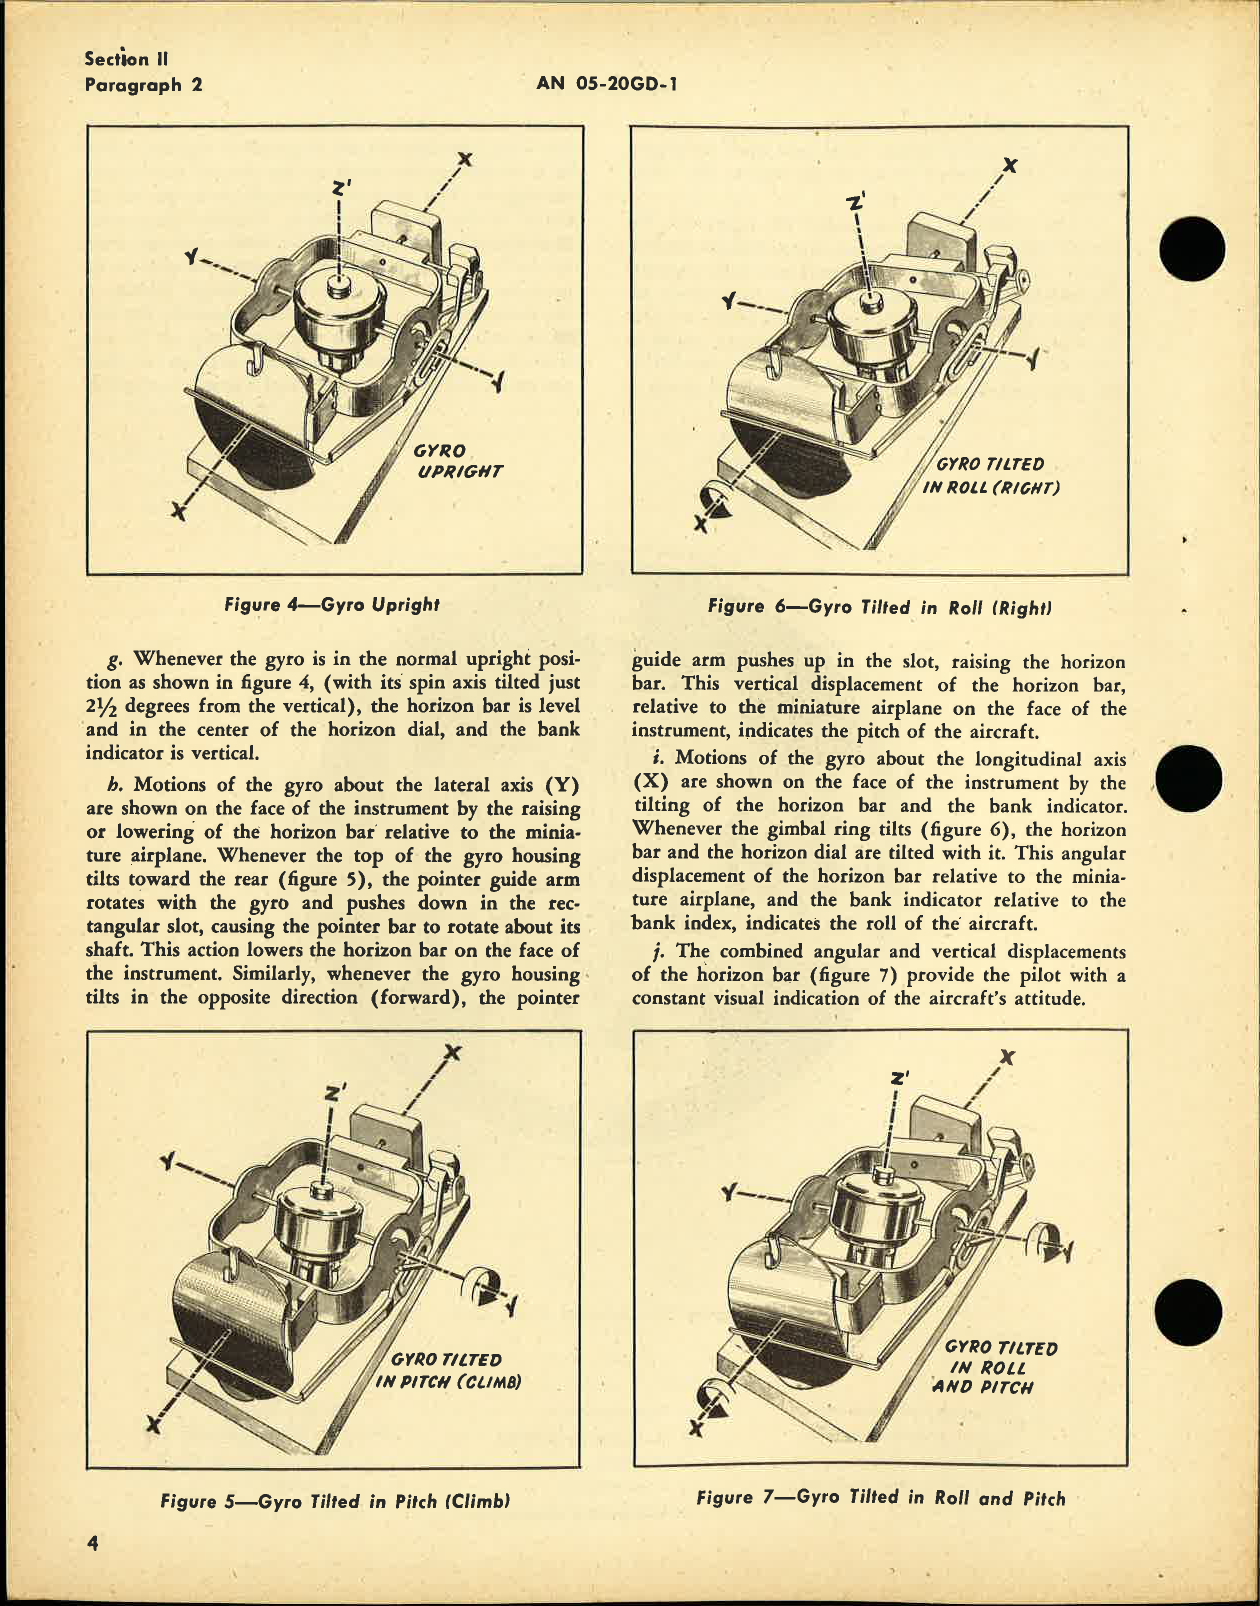 Sample page 8 from AirCorps Library document: Operation and Service Instructions Gyro Horizon Indicators